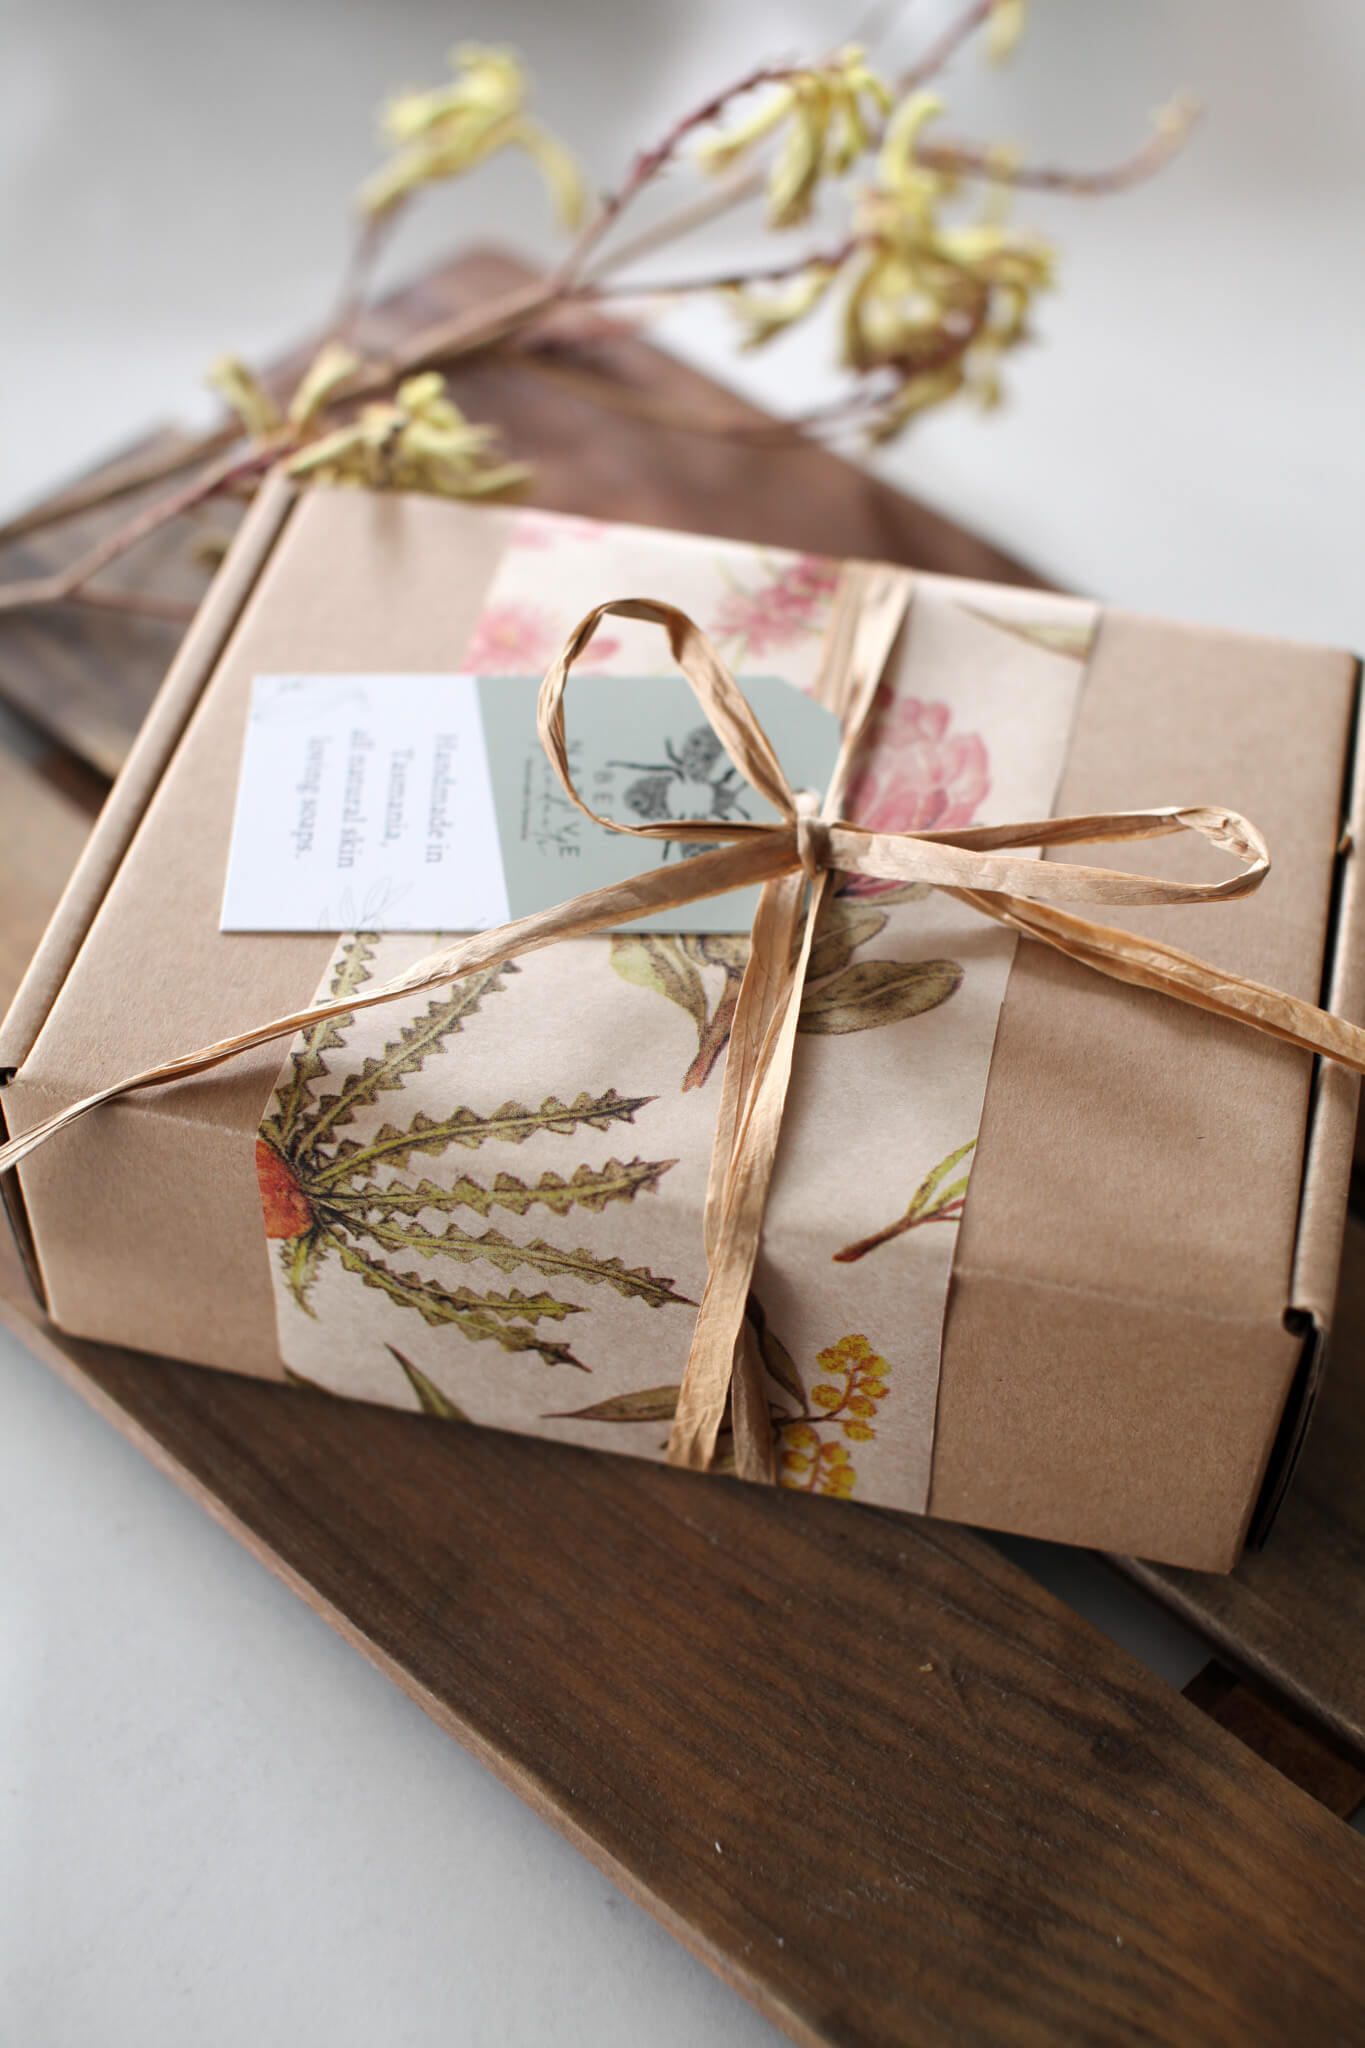 The essentials gift box - Bee native products